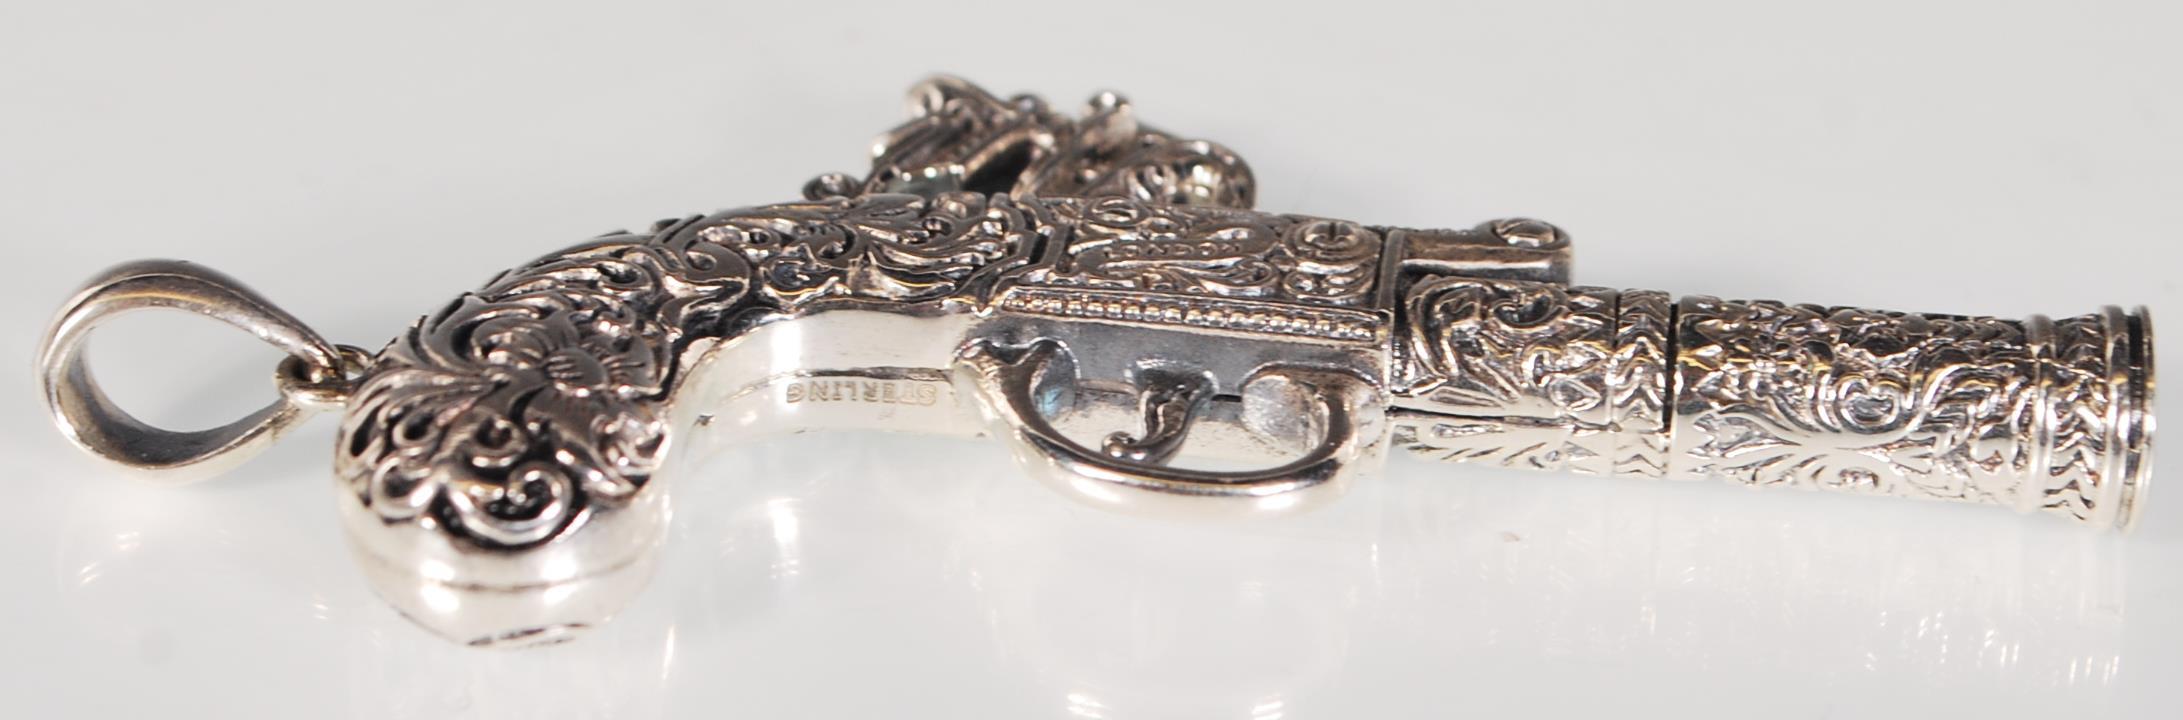 An unusual silver pendant whistle in the form of a flintlock pistol having finely engraved foliate - Image 3 of 5